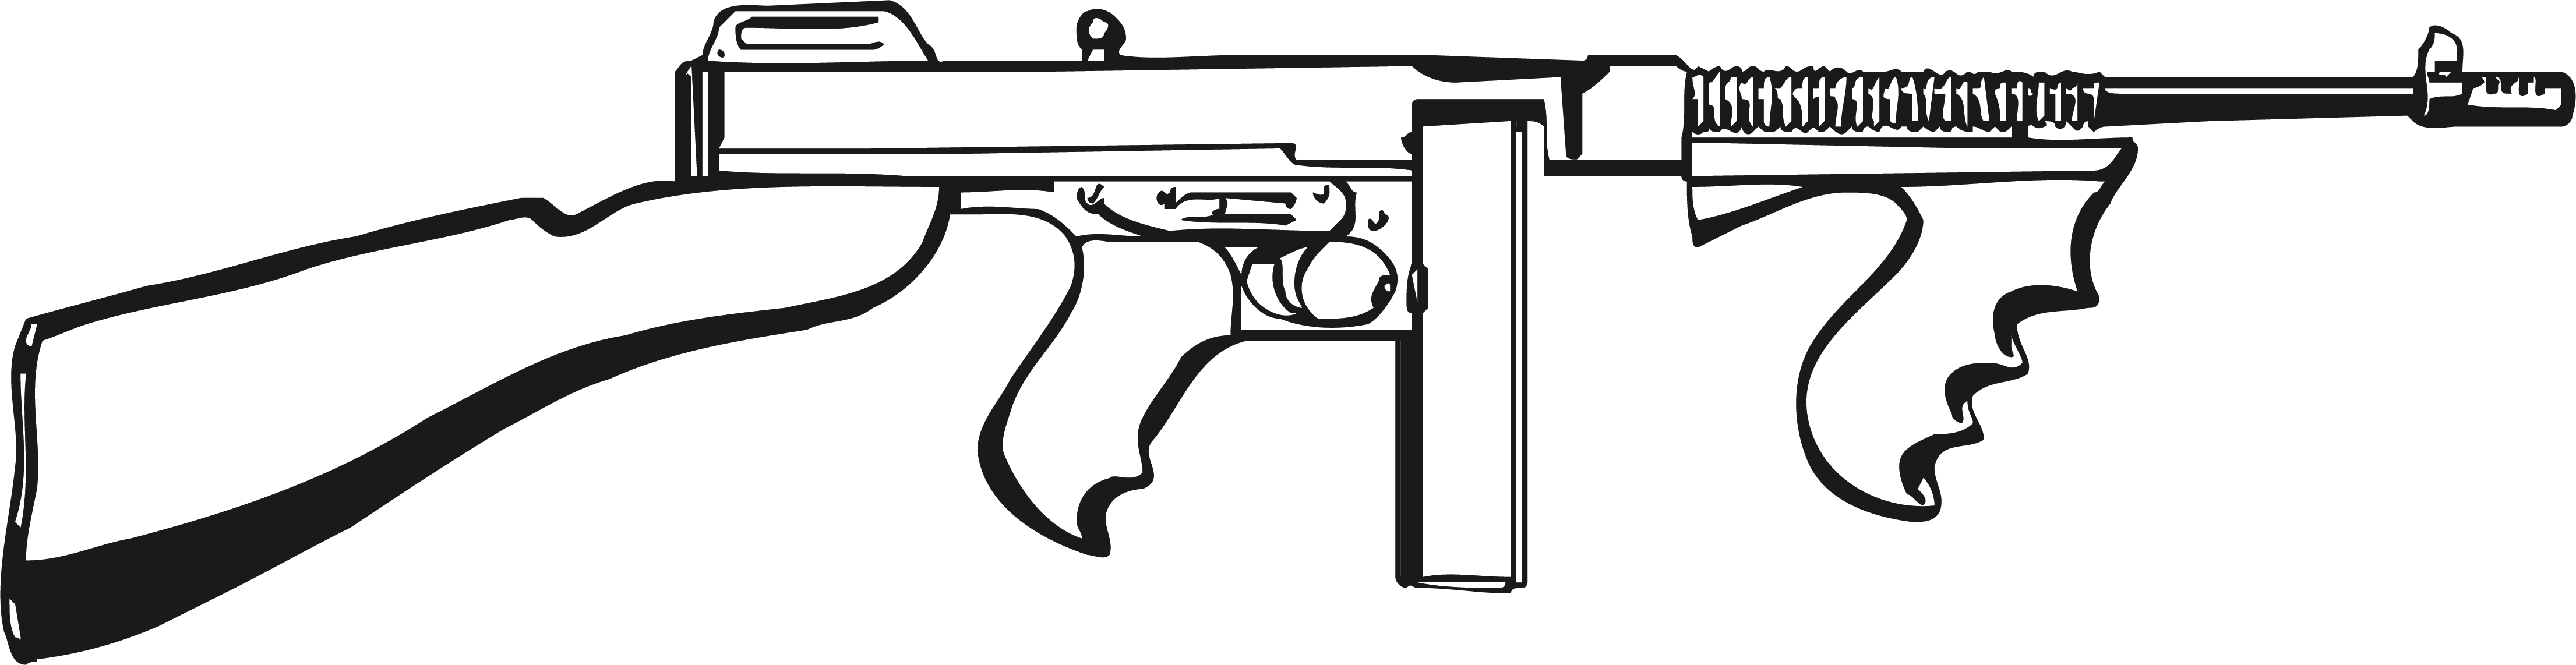 Angle Weapon Gun Accessory Game Vector PNG Image